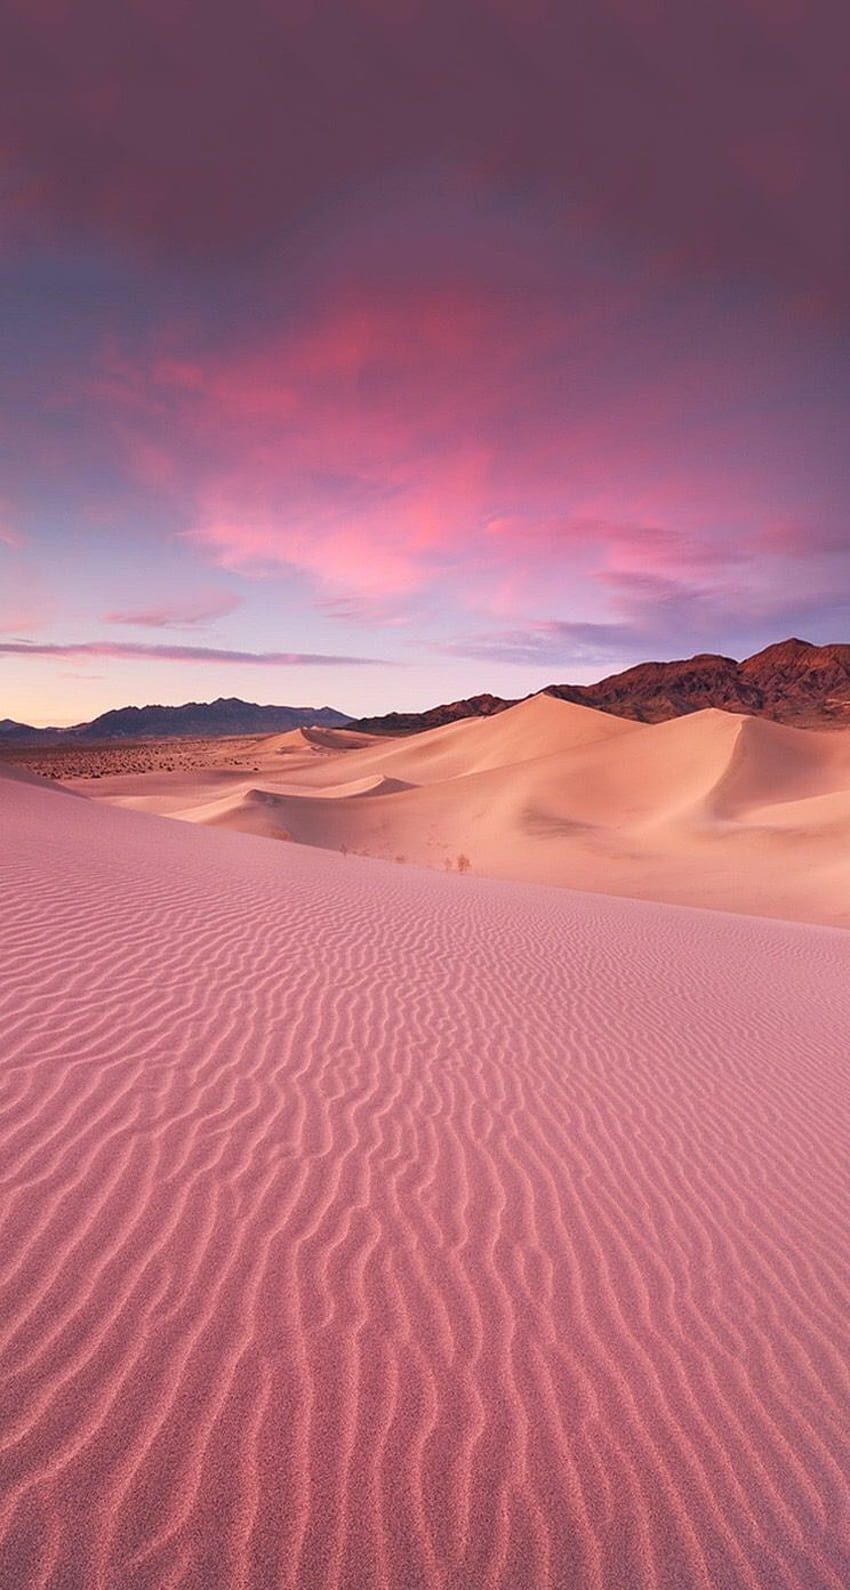 A sand dune with a pink sky above it - Desert